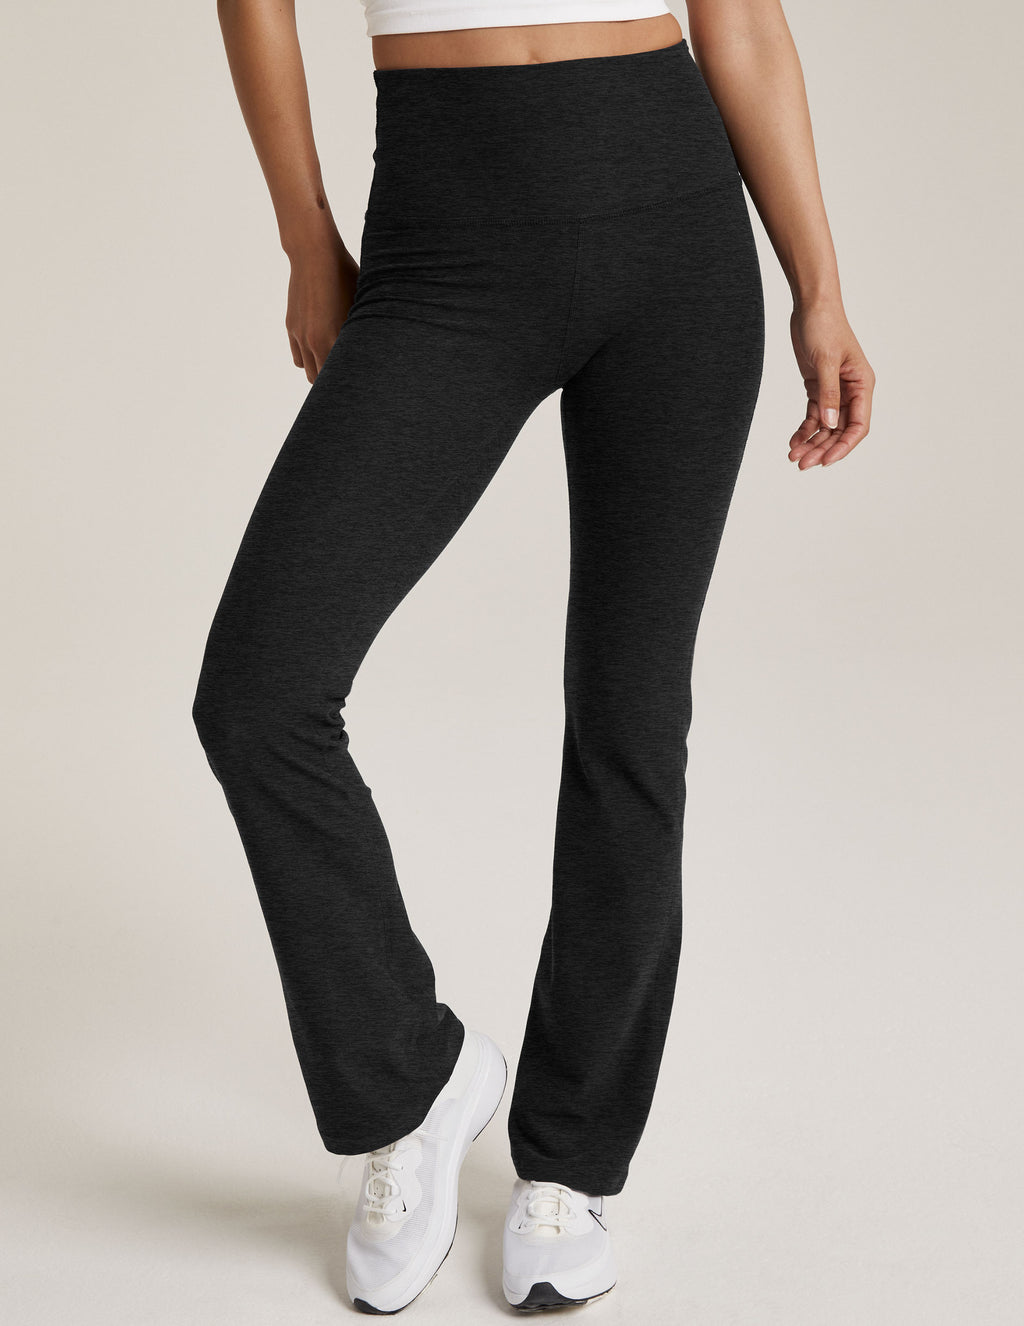 Spacedye Limitless High Waisted Straight Leg Pant Featured Image